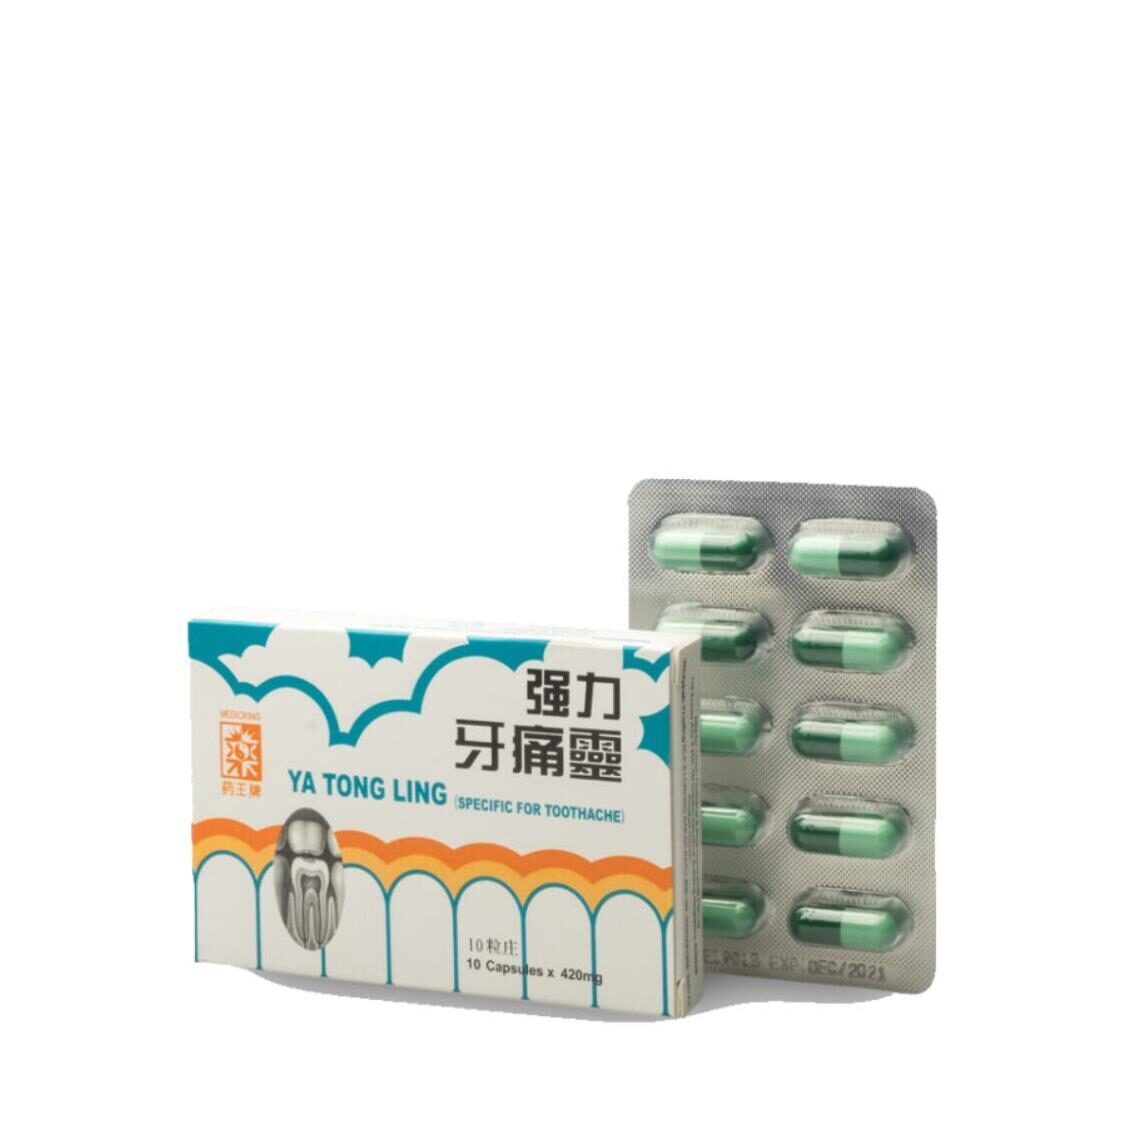 Winlykah TCM Mediking Ya Tong Ling Specific For Toothache 420mg x 10 Caps